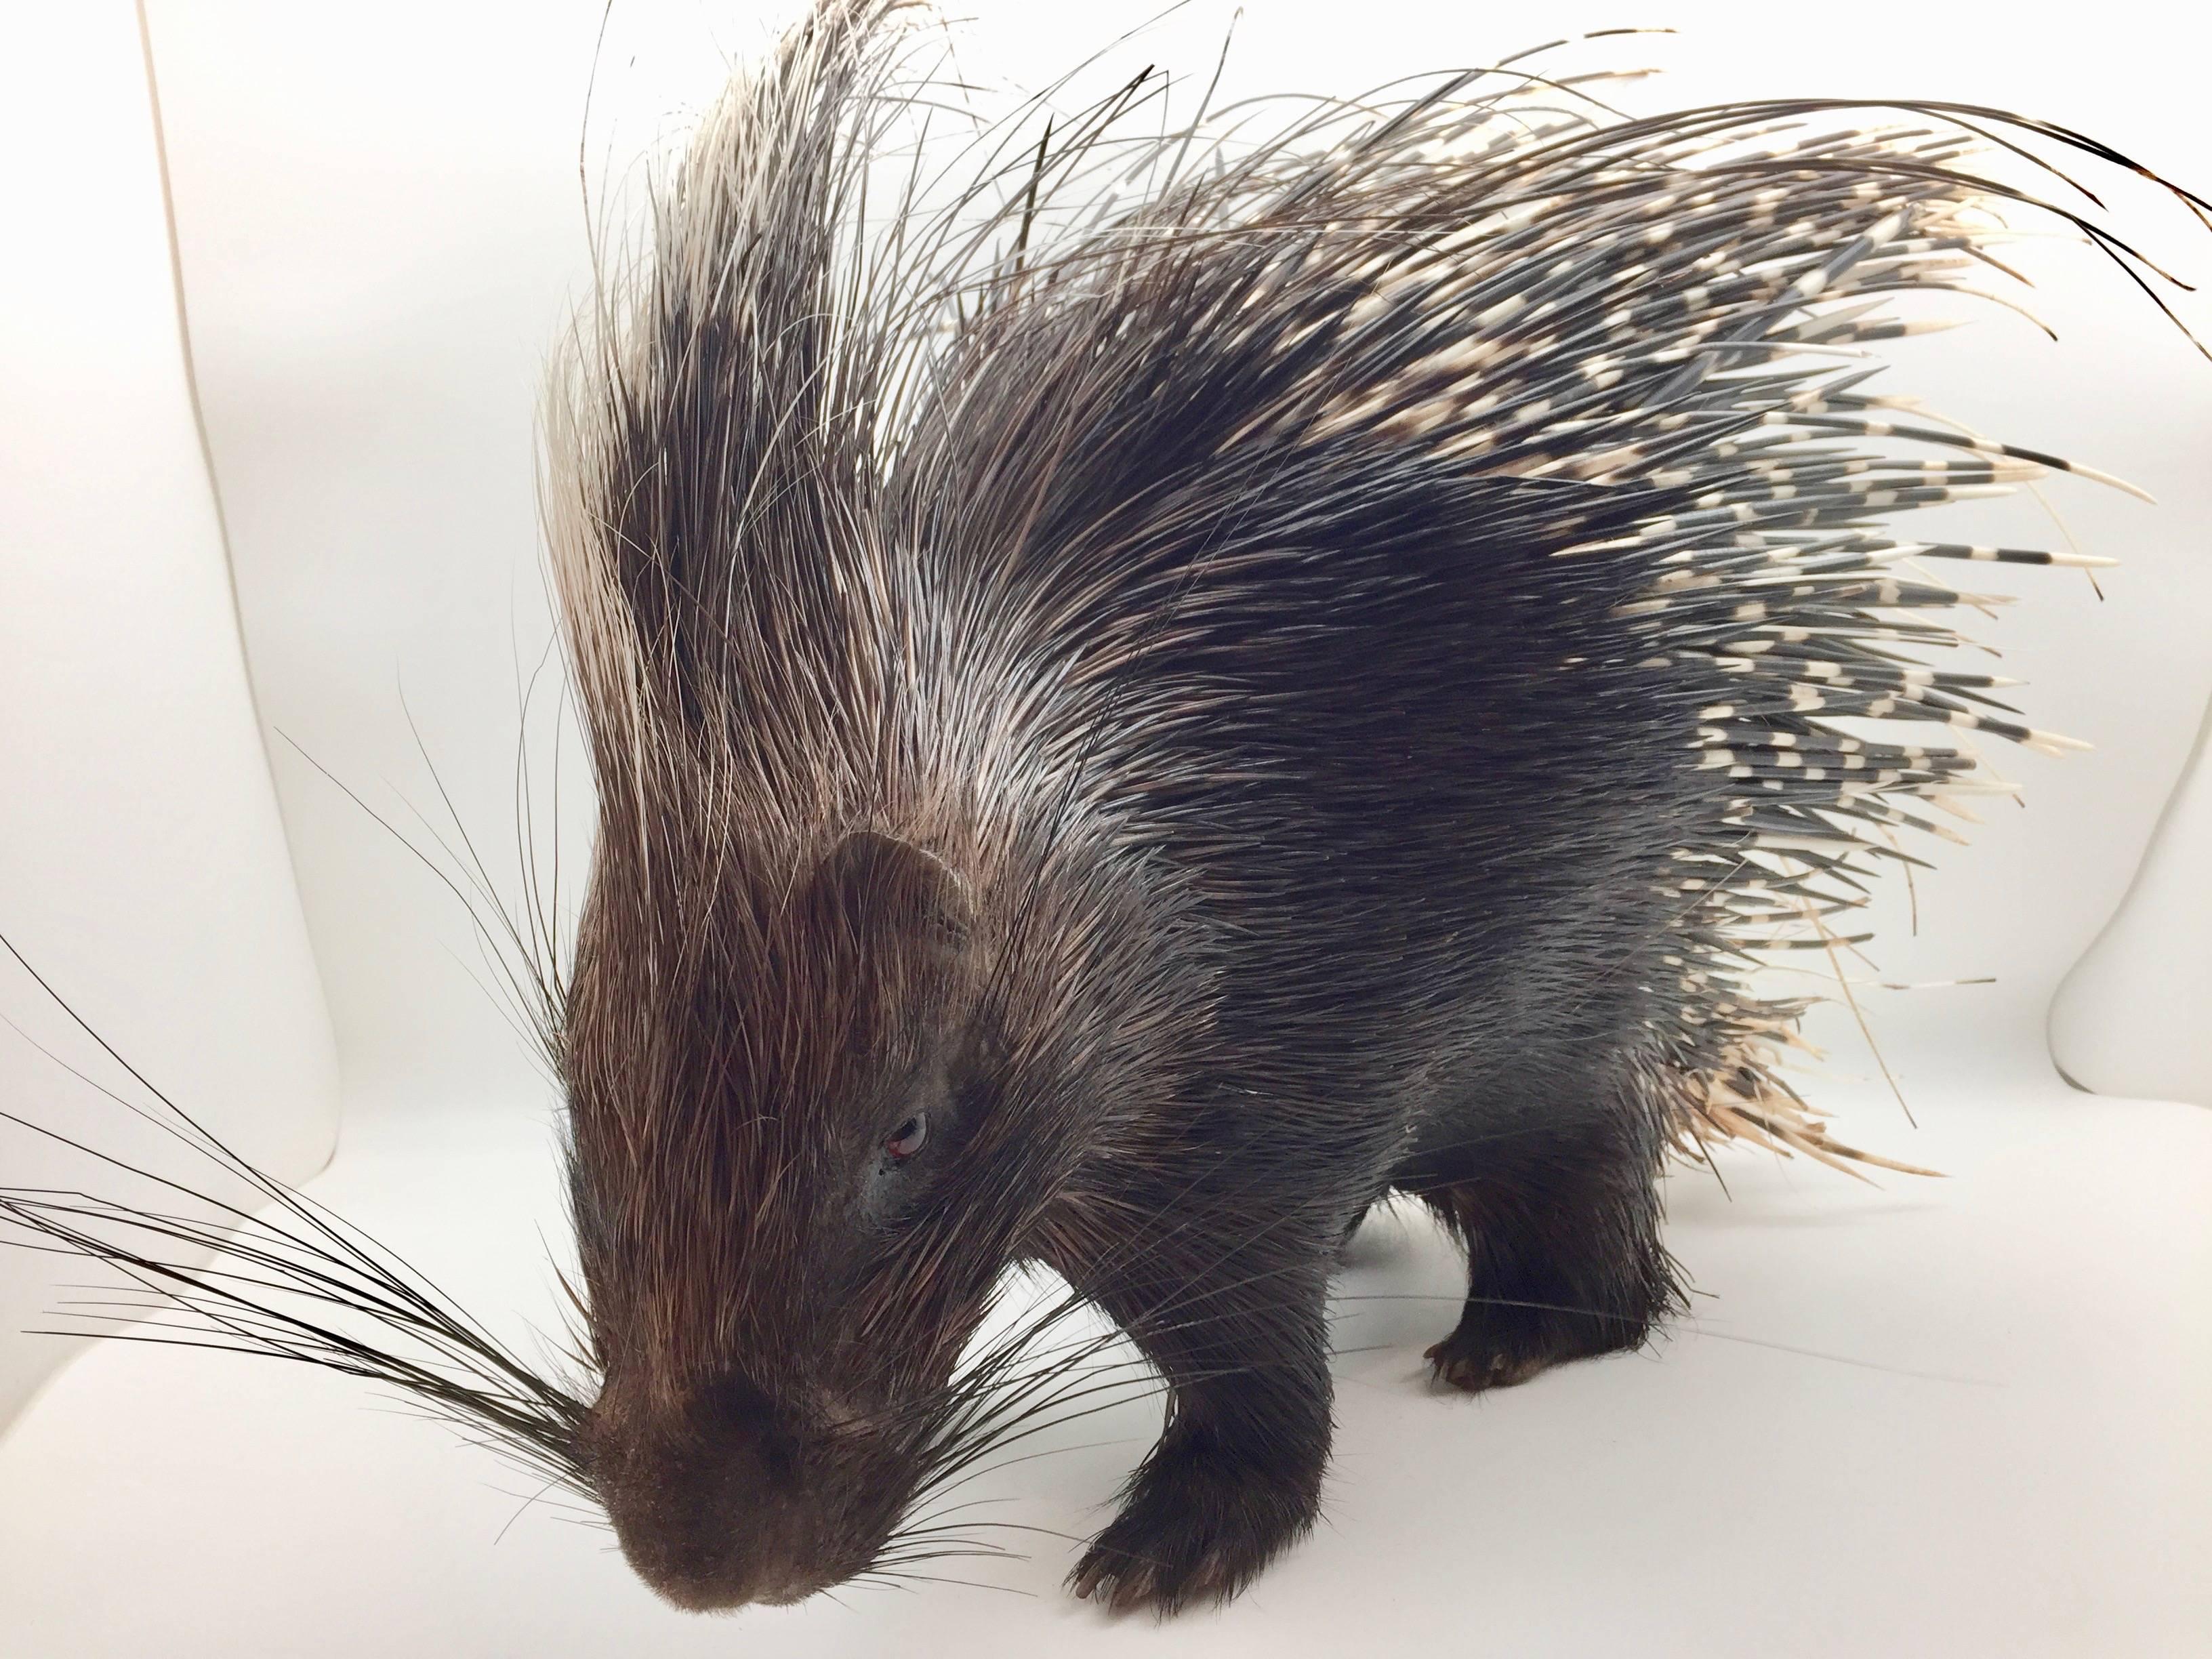 Large South African Crested Porcupine or Hystrix Cristata 3